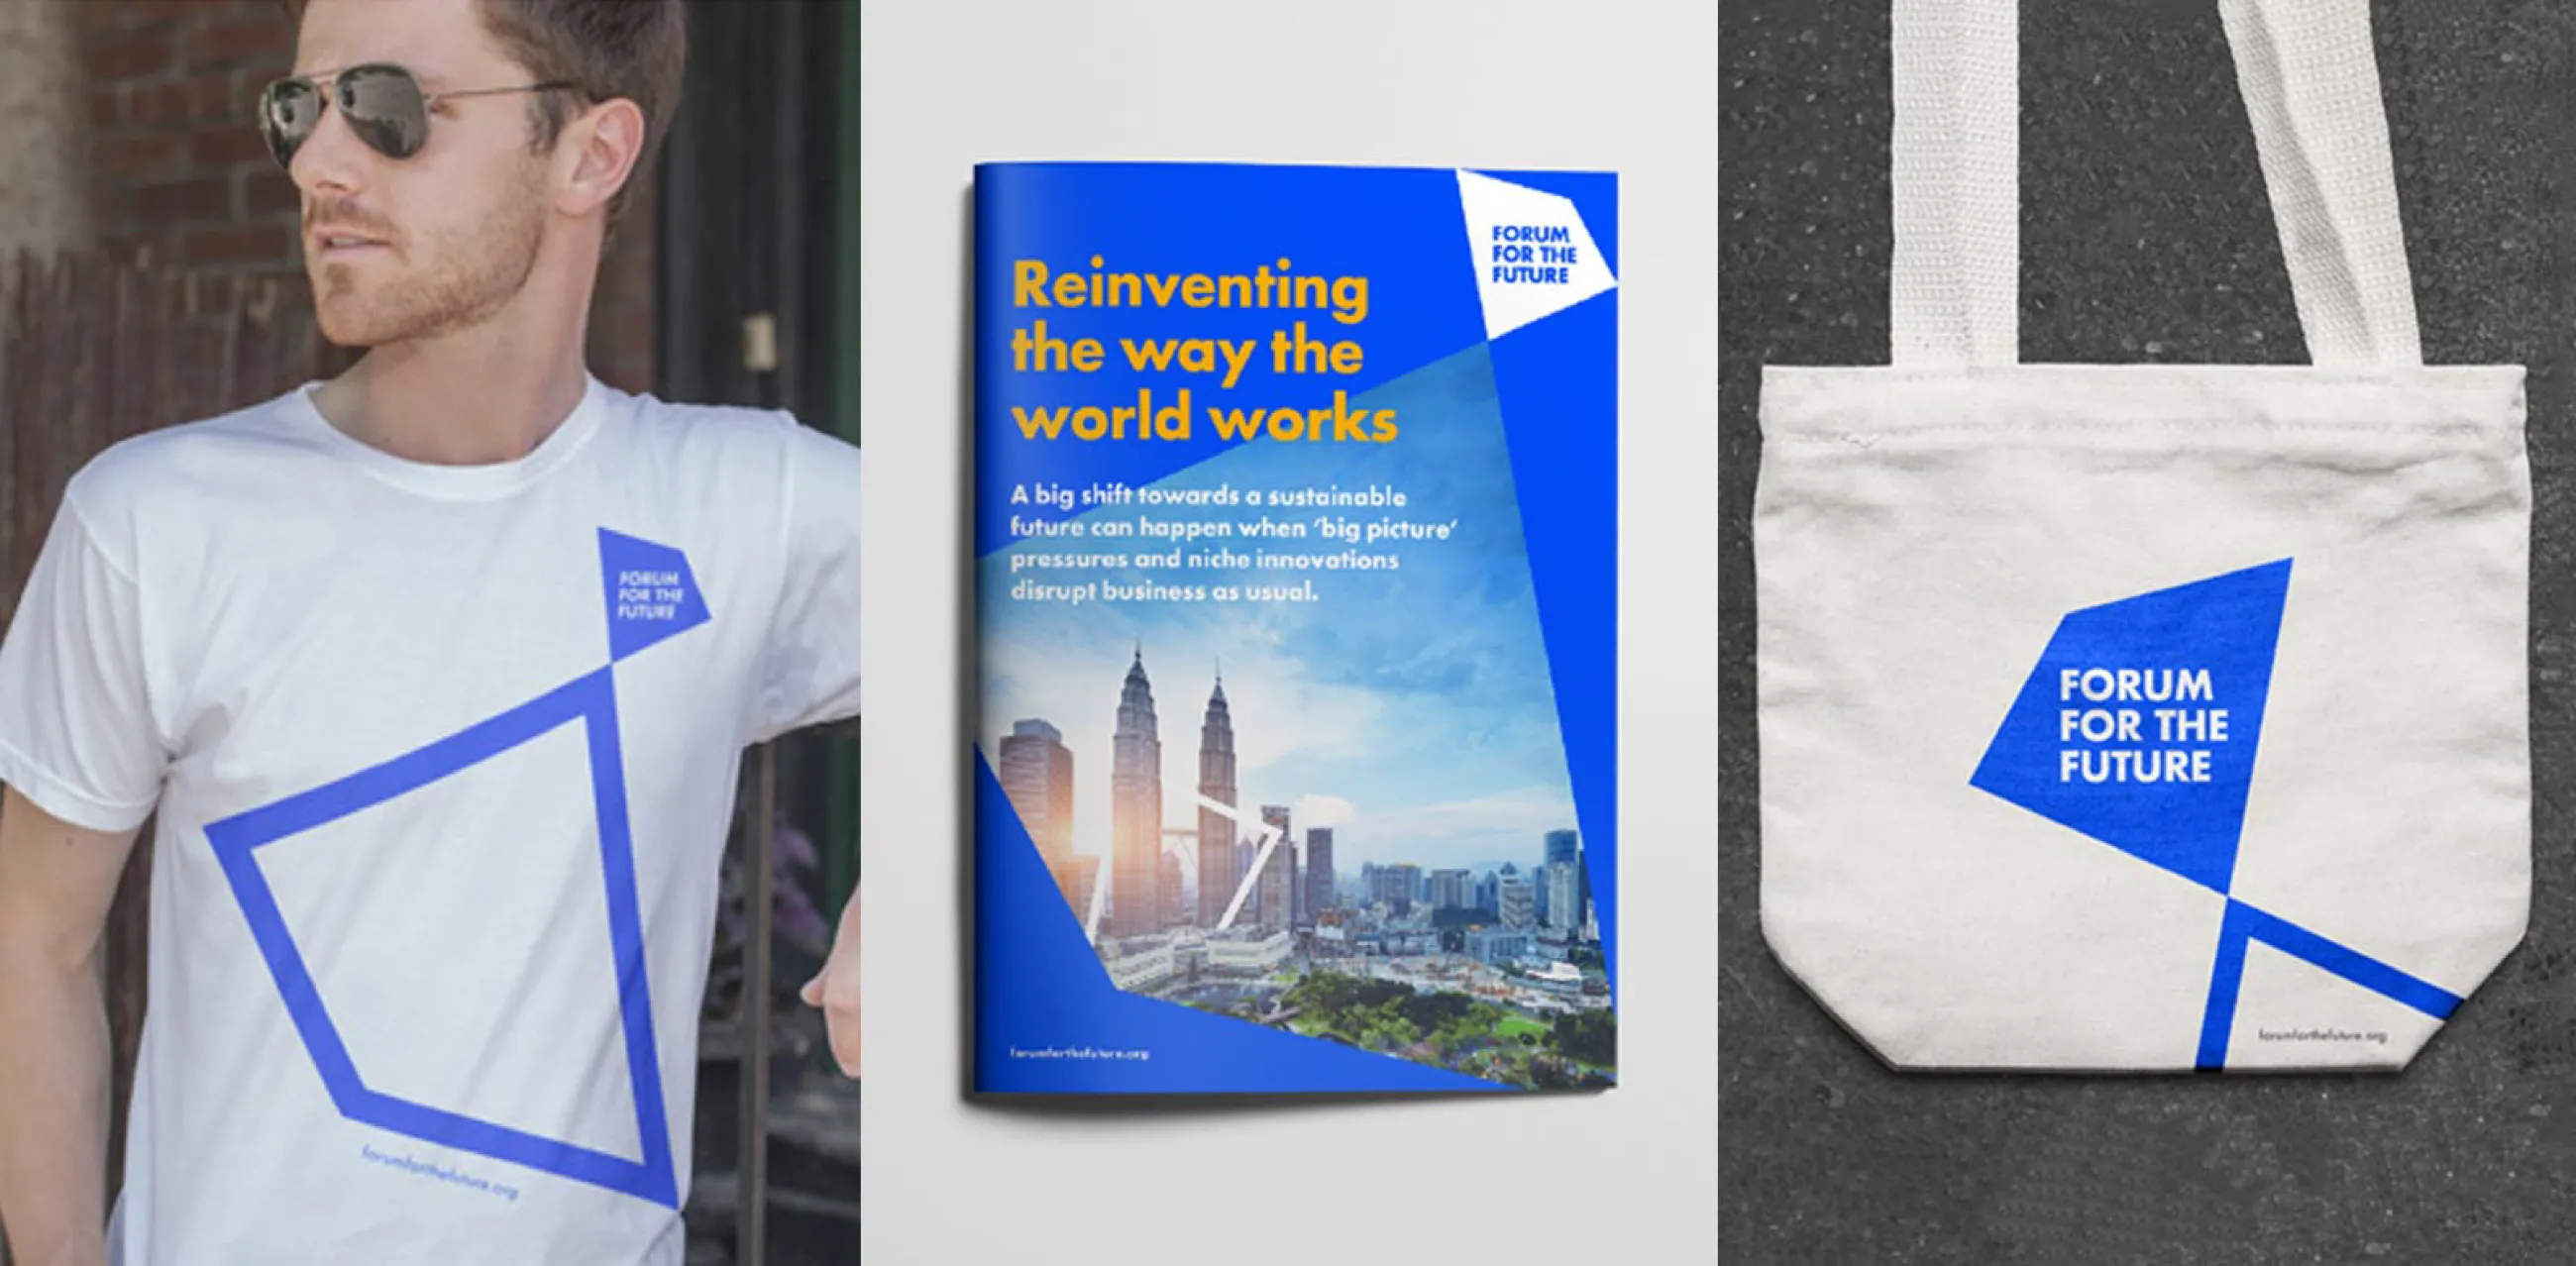 New Forum for the Future log and visual identity shown applied to t-shirts, bags and brochures